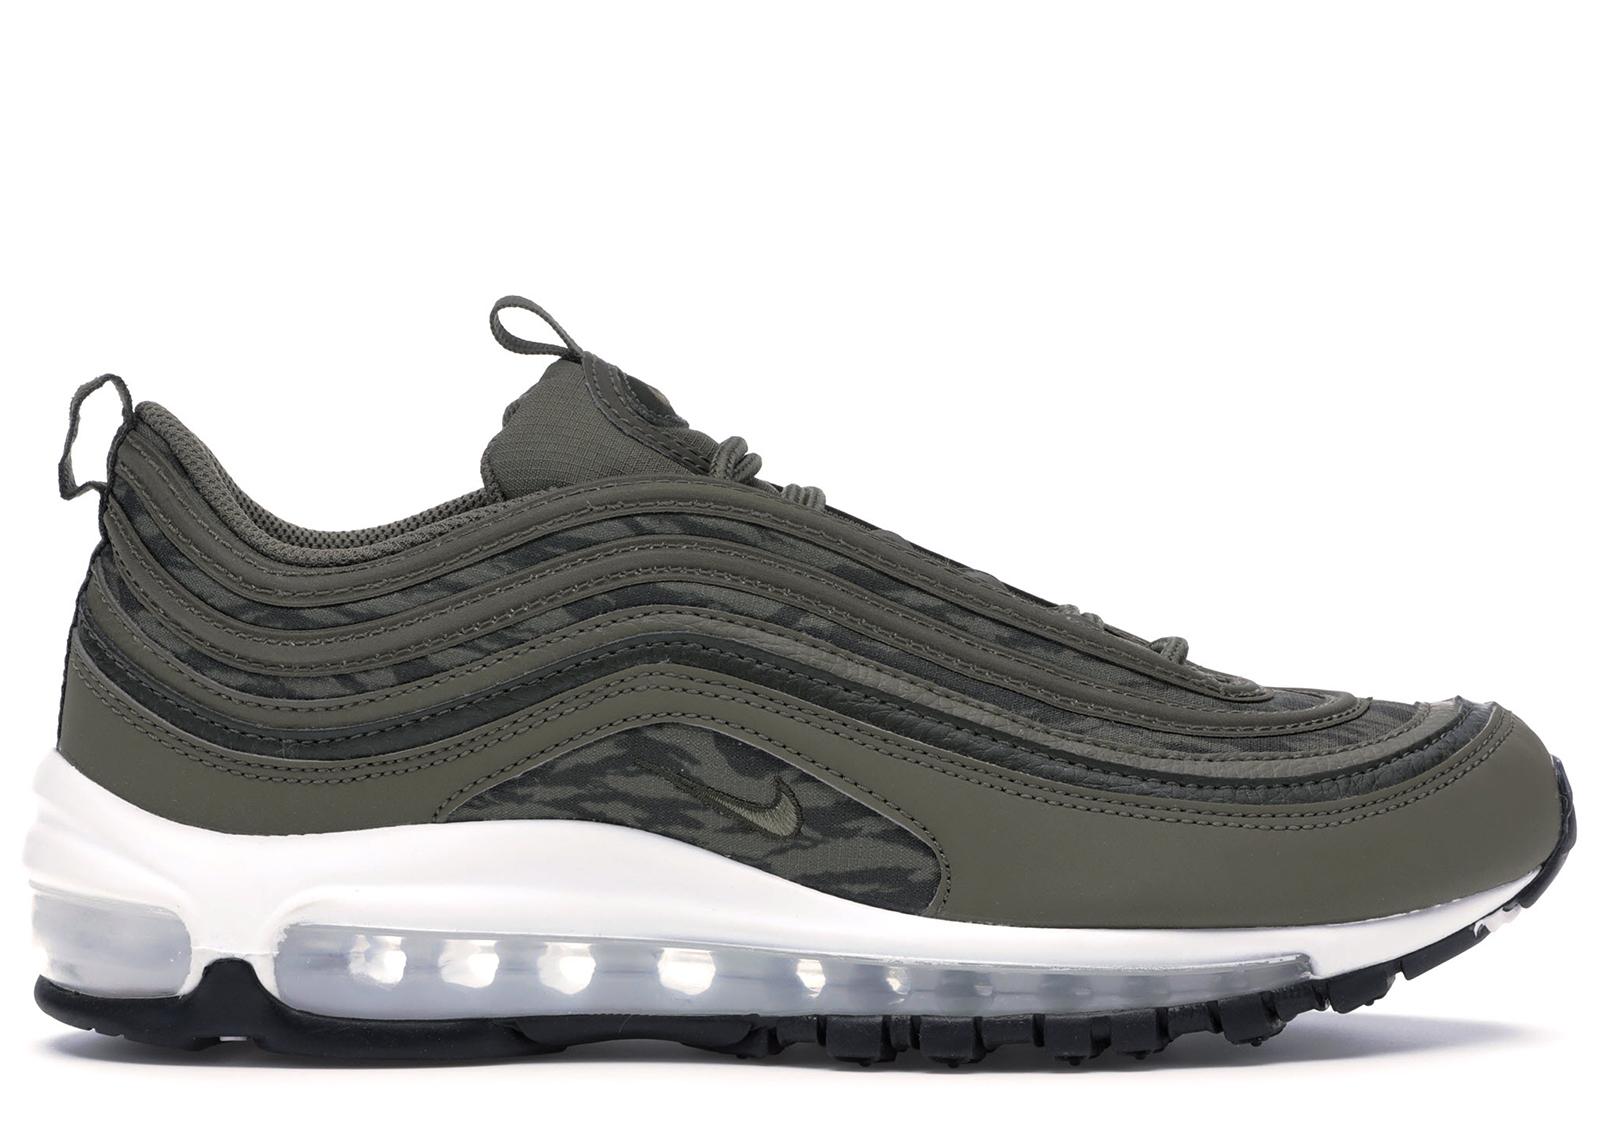 Nike Air Max 97 Tiger Camo Olive in 